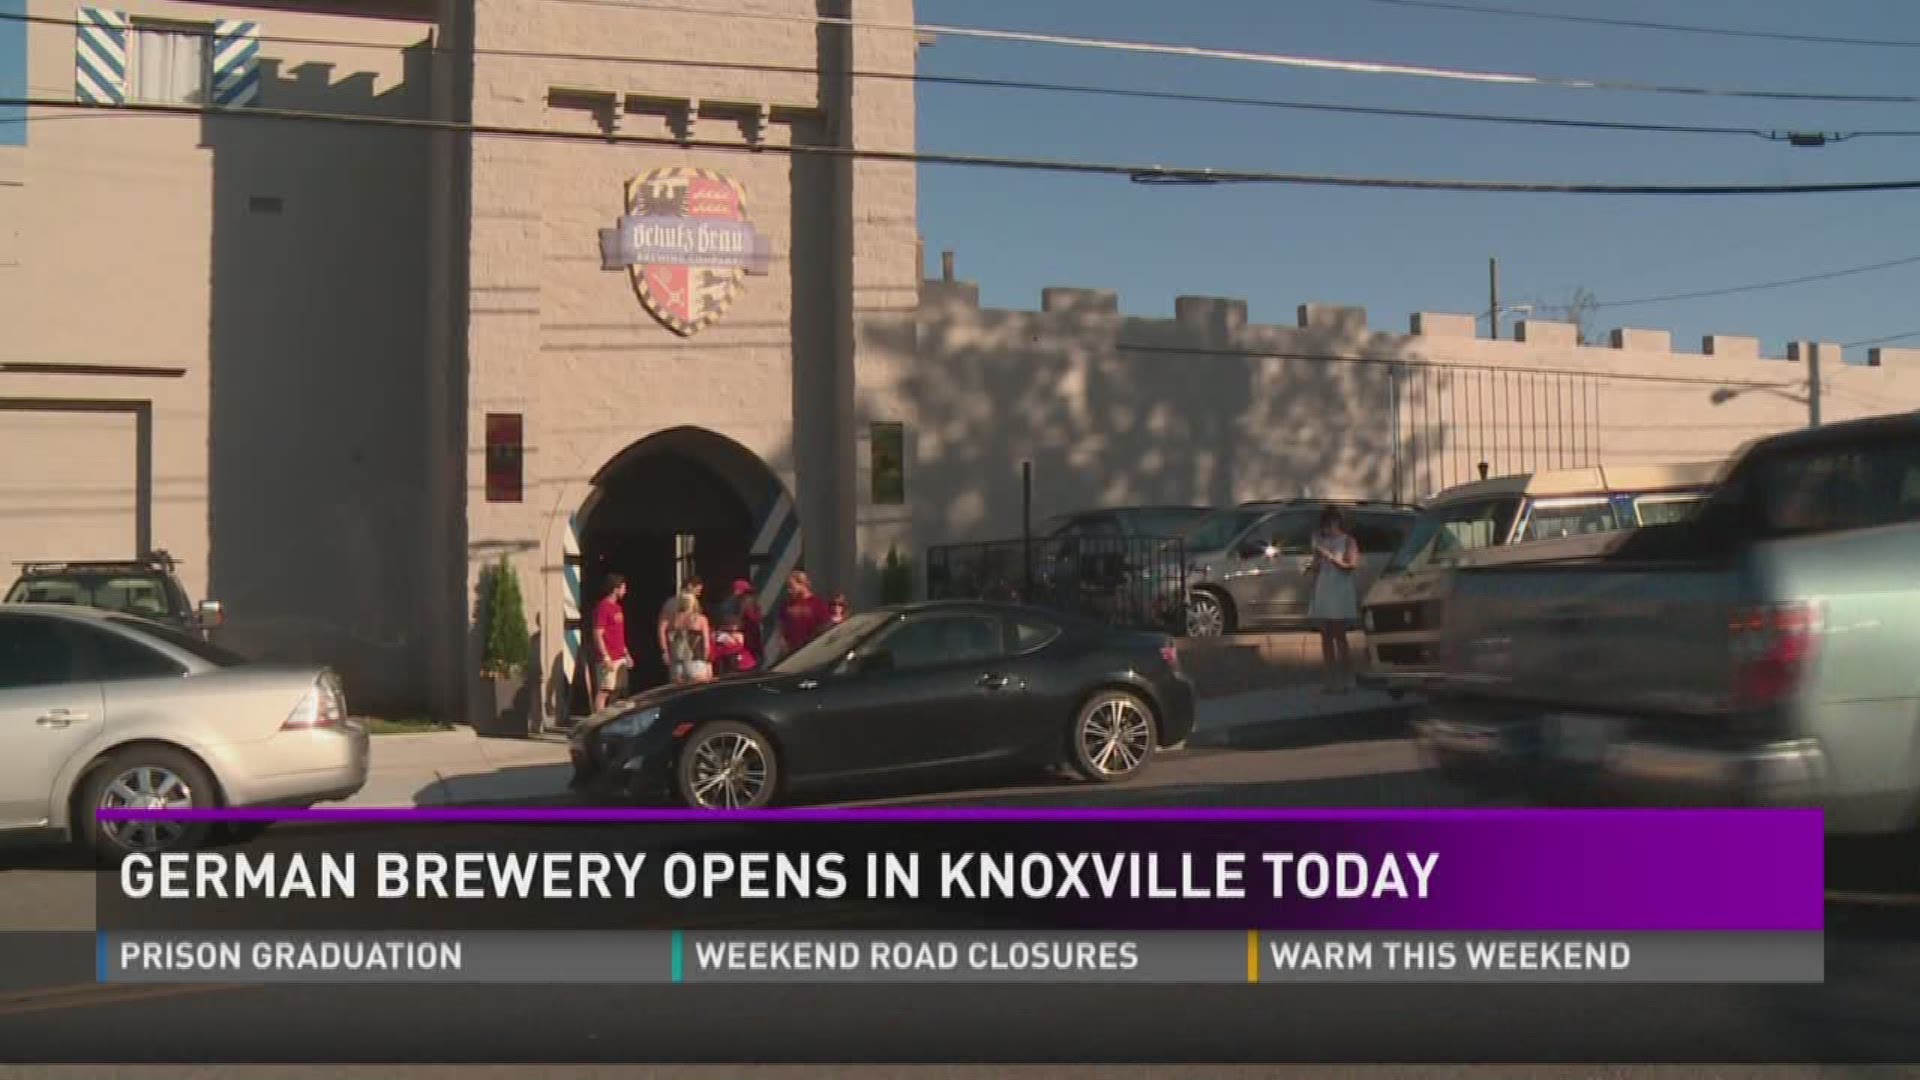 A German brewery opens in downtown Knoxville.